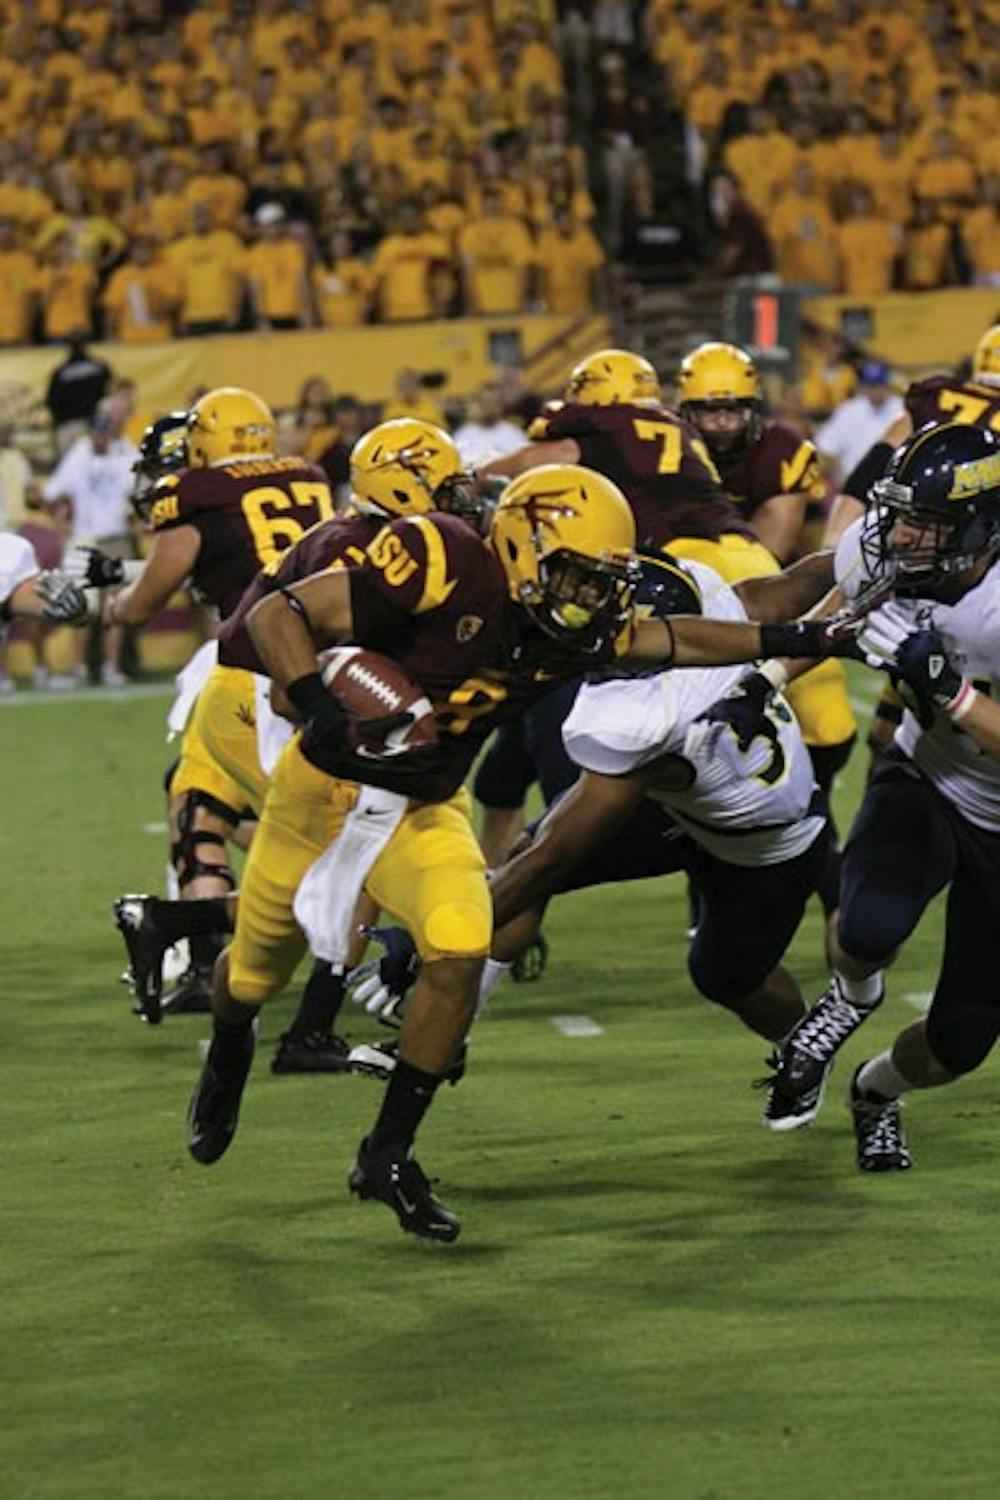 Freshman running back D.J. Foster (8) stiff-arms an NAU defender during the Sun Devils’ 63-6 win over the Lumberjacks on Sept. 30. (Photo by Vince Dwyer)